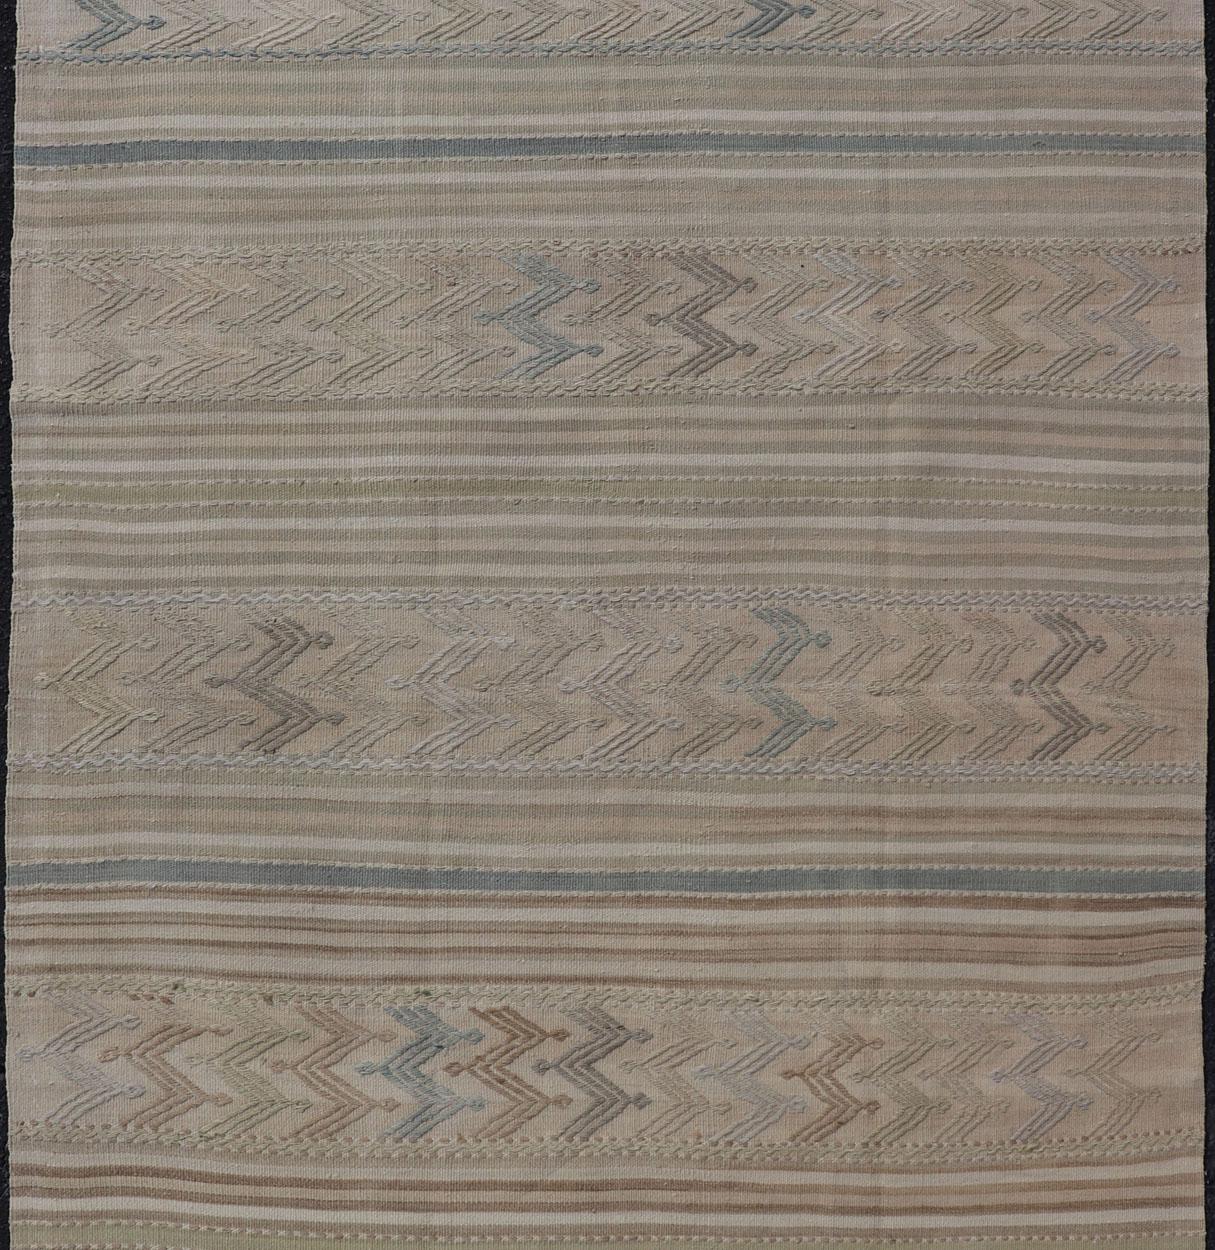 Vintage Turkish Flat-Weave Muted Colored Kilim in Taupe, Brown and Light Blue In Good Condition For Sale In Atlanta, GA